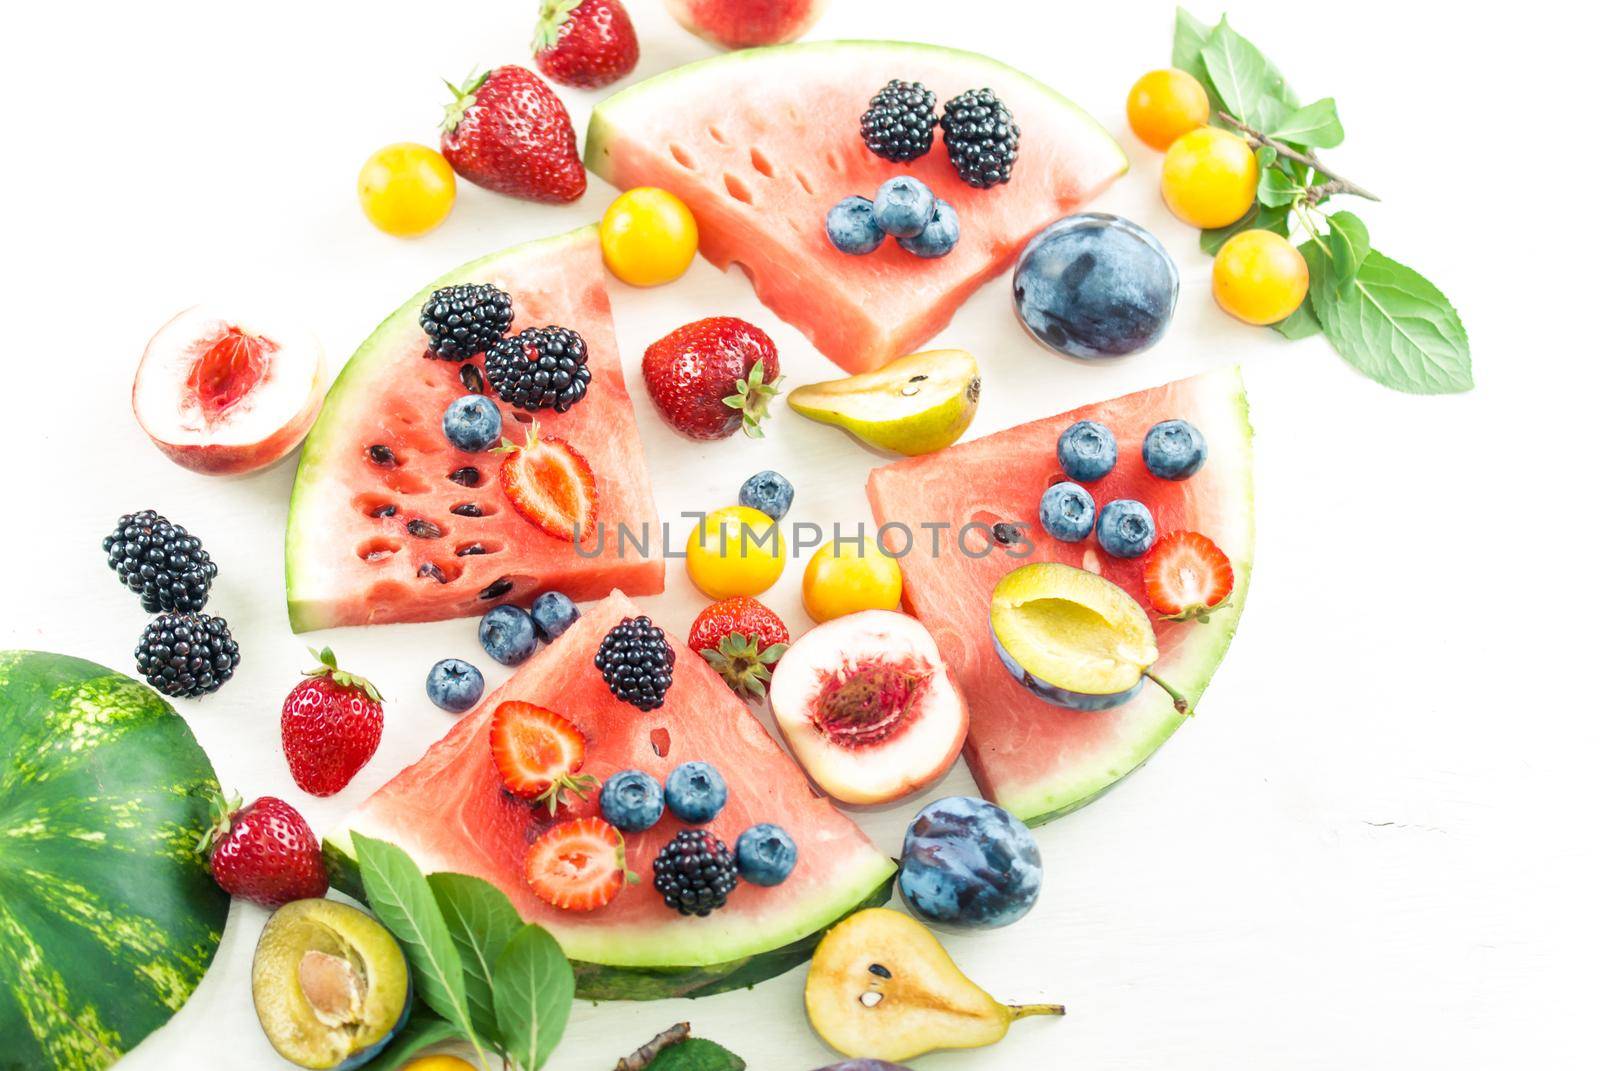 variation of summer berries and fruits cutted in pieces on white wooden background